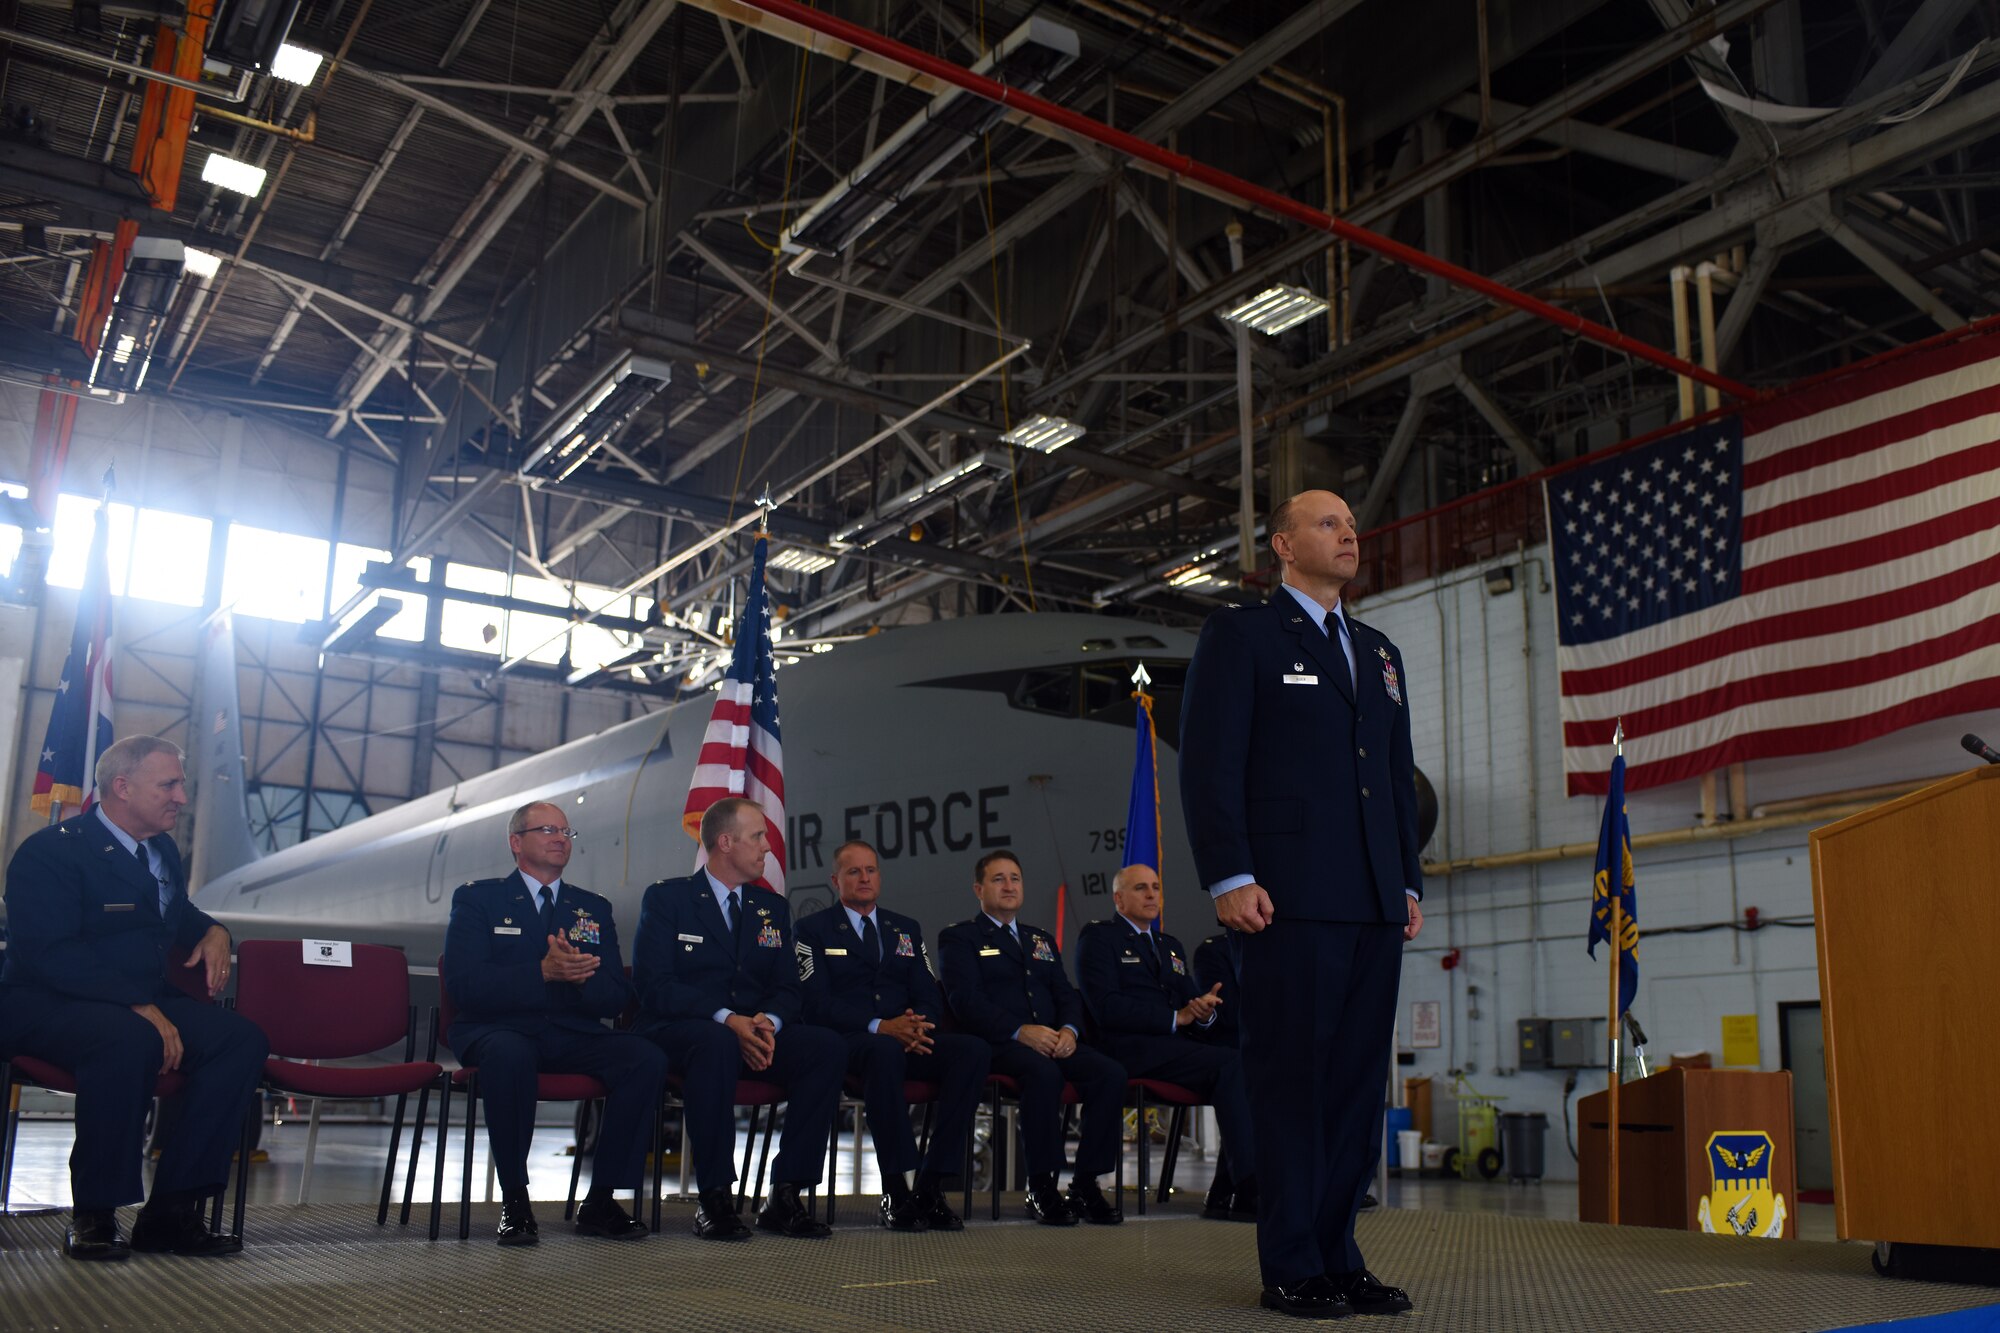 U.S. Air Force Col. Mark Auer stands front and center during the 121st Air Refueling Wing's change of command ceremony July 12, 2015, at Rickenbacker Air National Guard Base, Ohio. Command of the wing was transferred from U.S. Air Force Col. Jim Jones to Col. Mark Auer.(U.S. Air National Guard photo by Master Sgt. Ralph Branson/Released)
